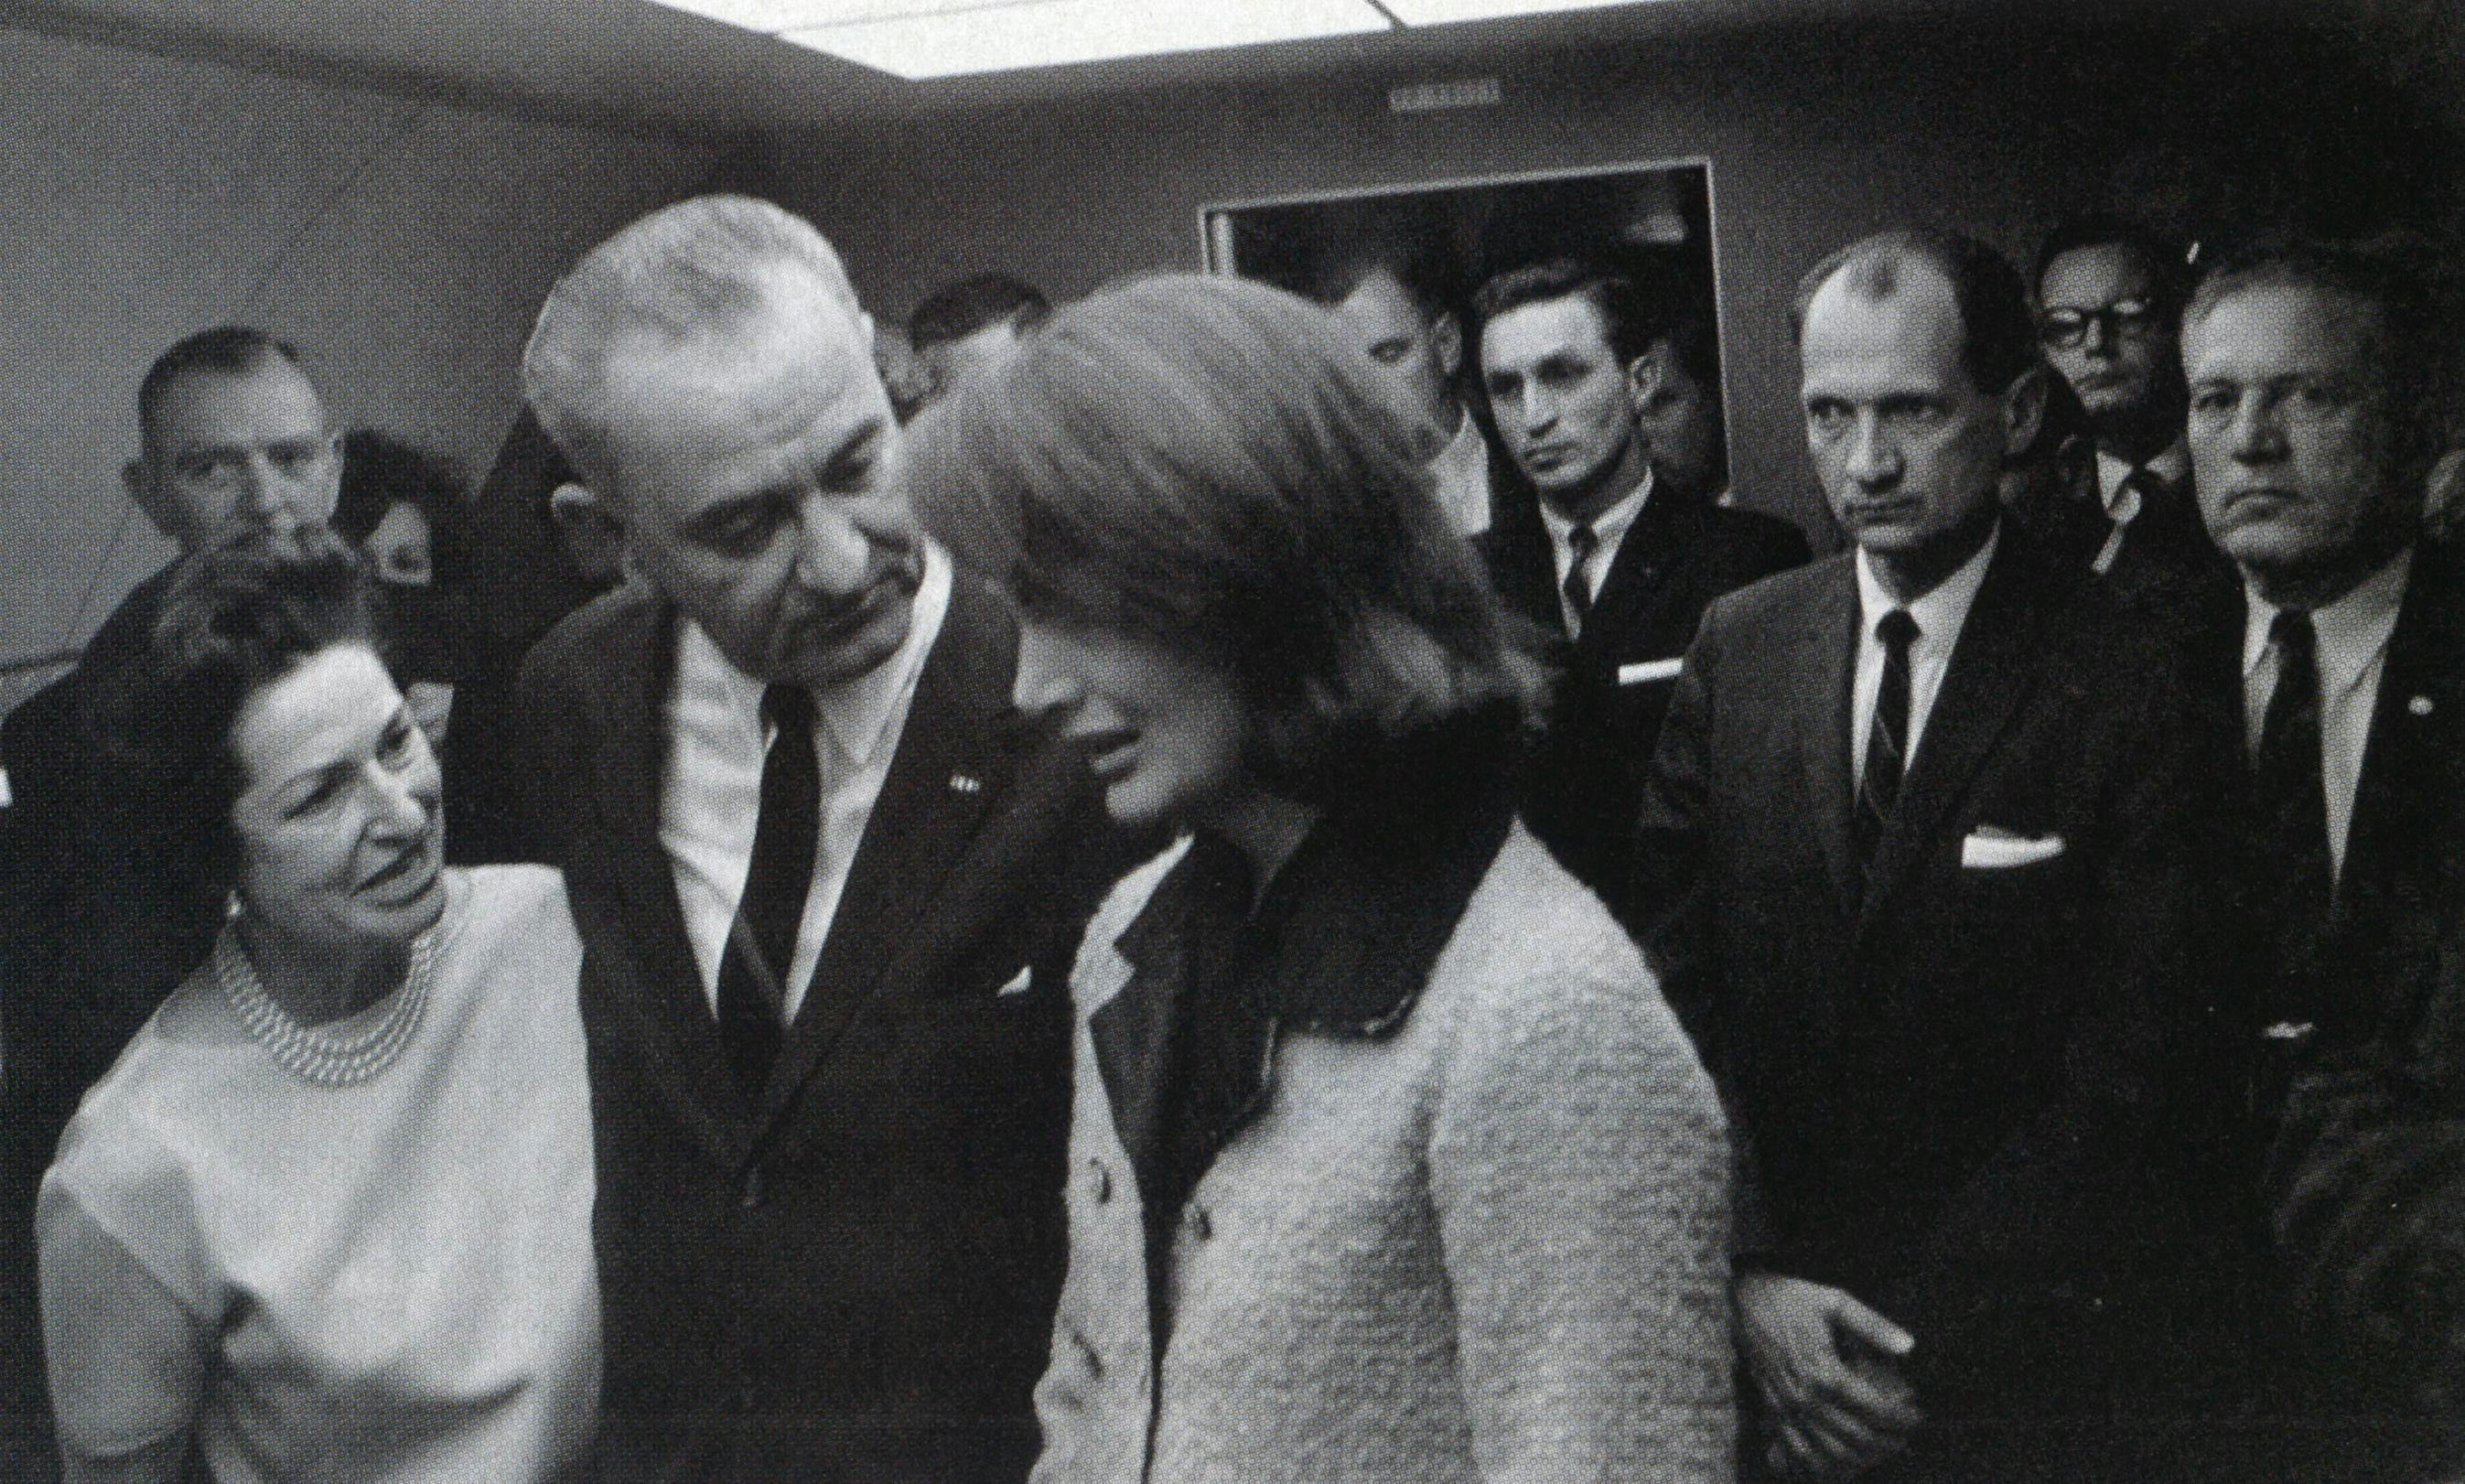 Shortly after the murder of President Kennedy, Lady Bird and LBJ comfort Mrs. Kennedy aboard Air Force One. Johnson later denied accusations that he had been insensitive to the Kennedy family after the tragedy.